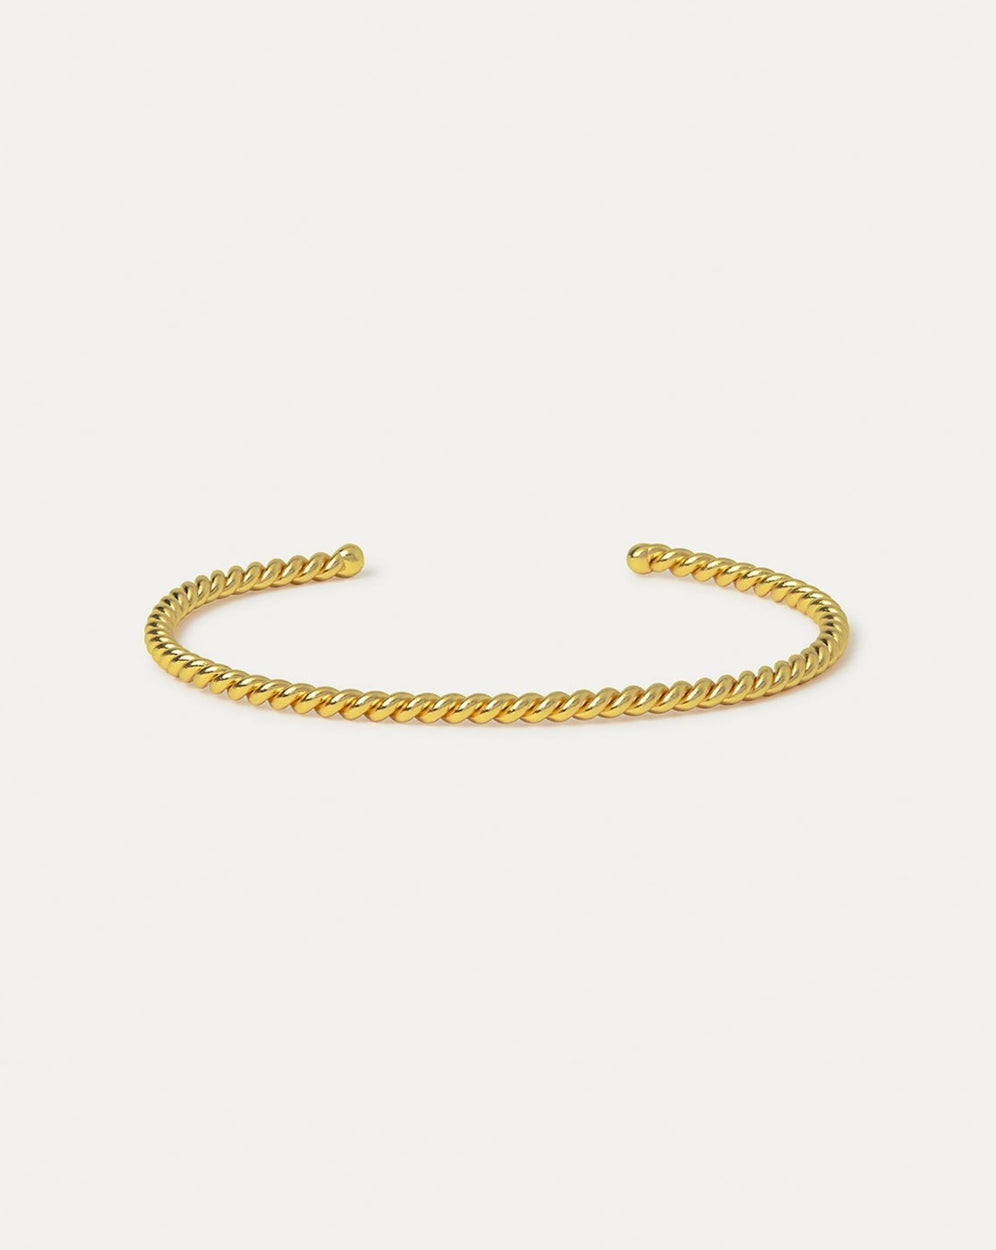 Elodie Chain Cuff Bracelet | Sustainable Jewellery by Ottoman Hands